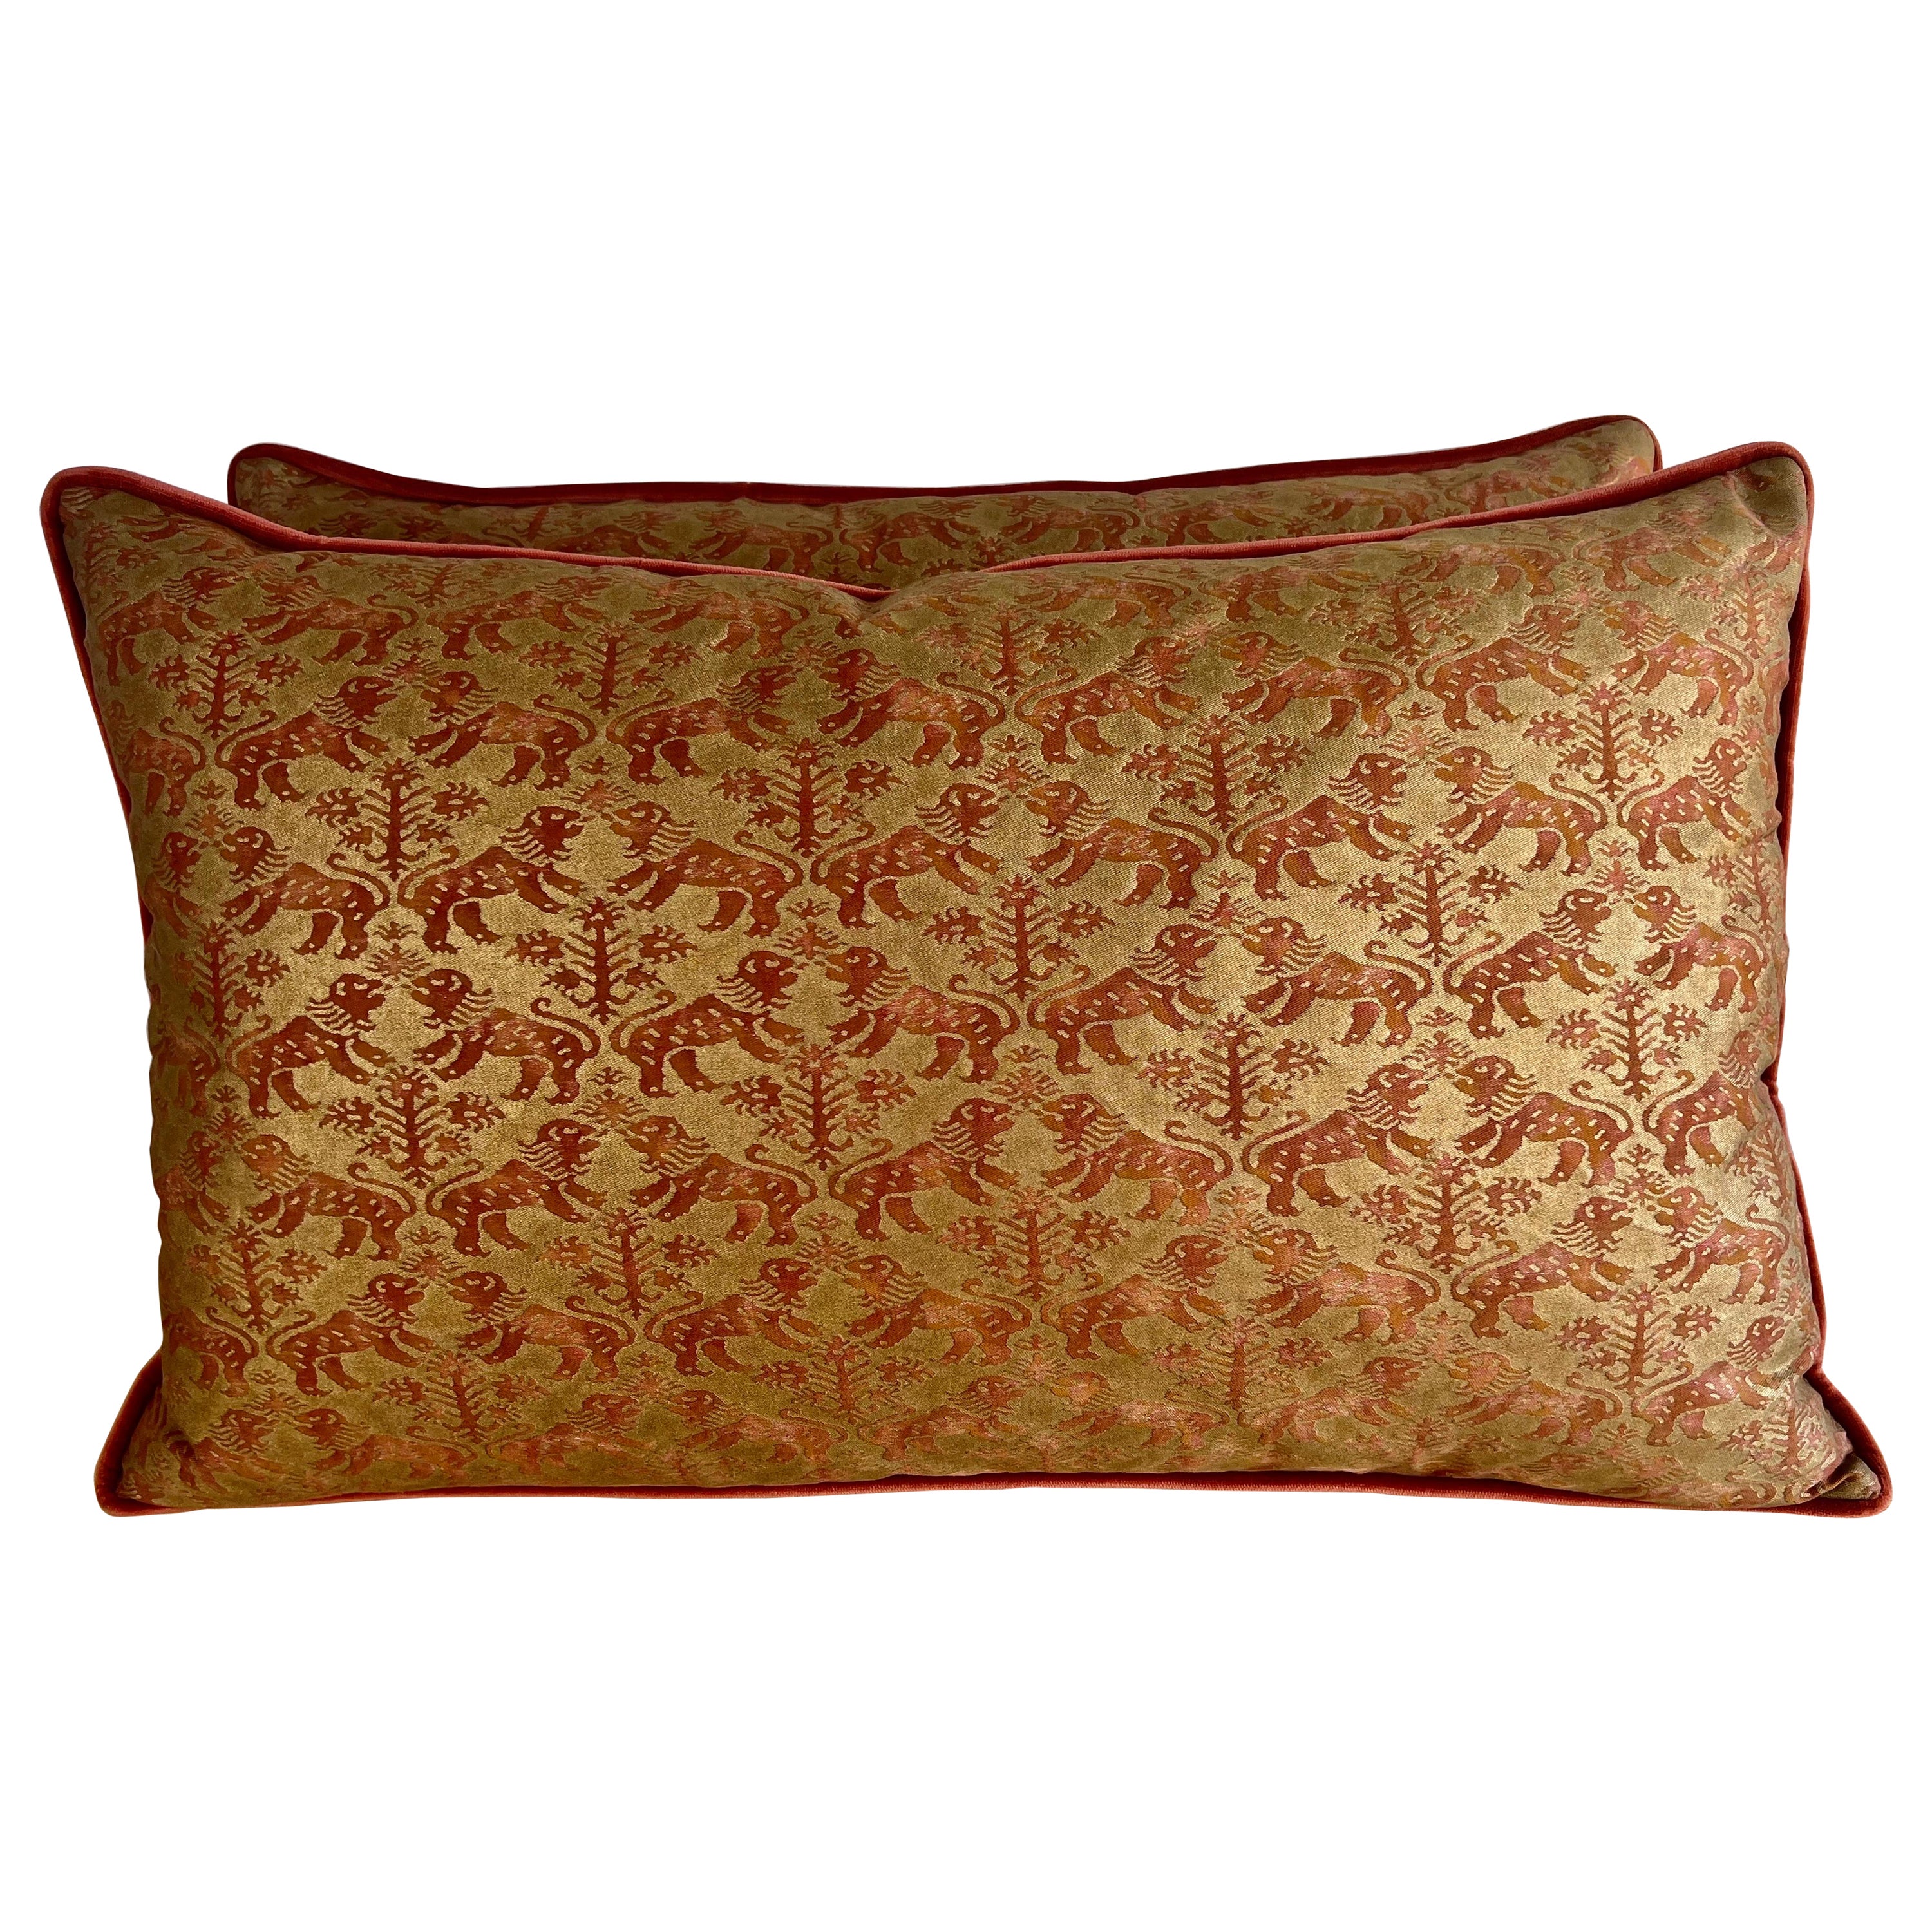 Pair of Richeleau Patterned Fortuny Pillows 